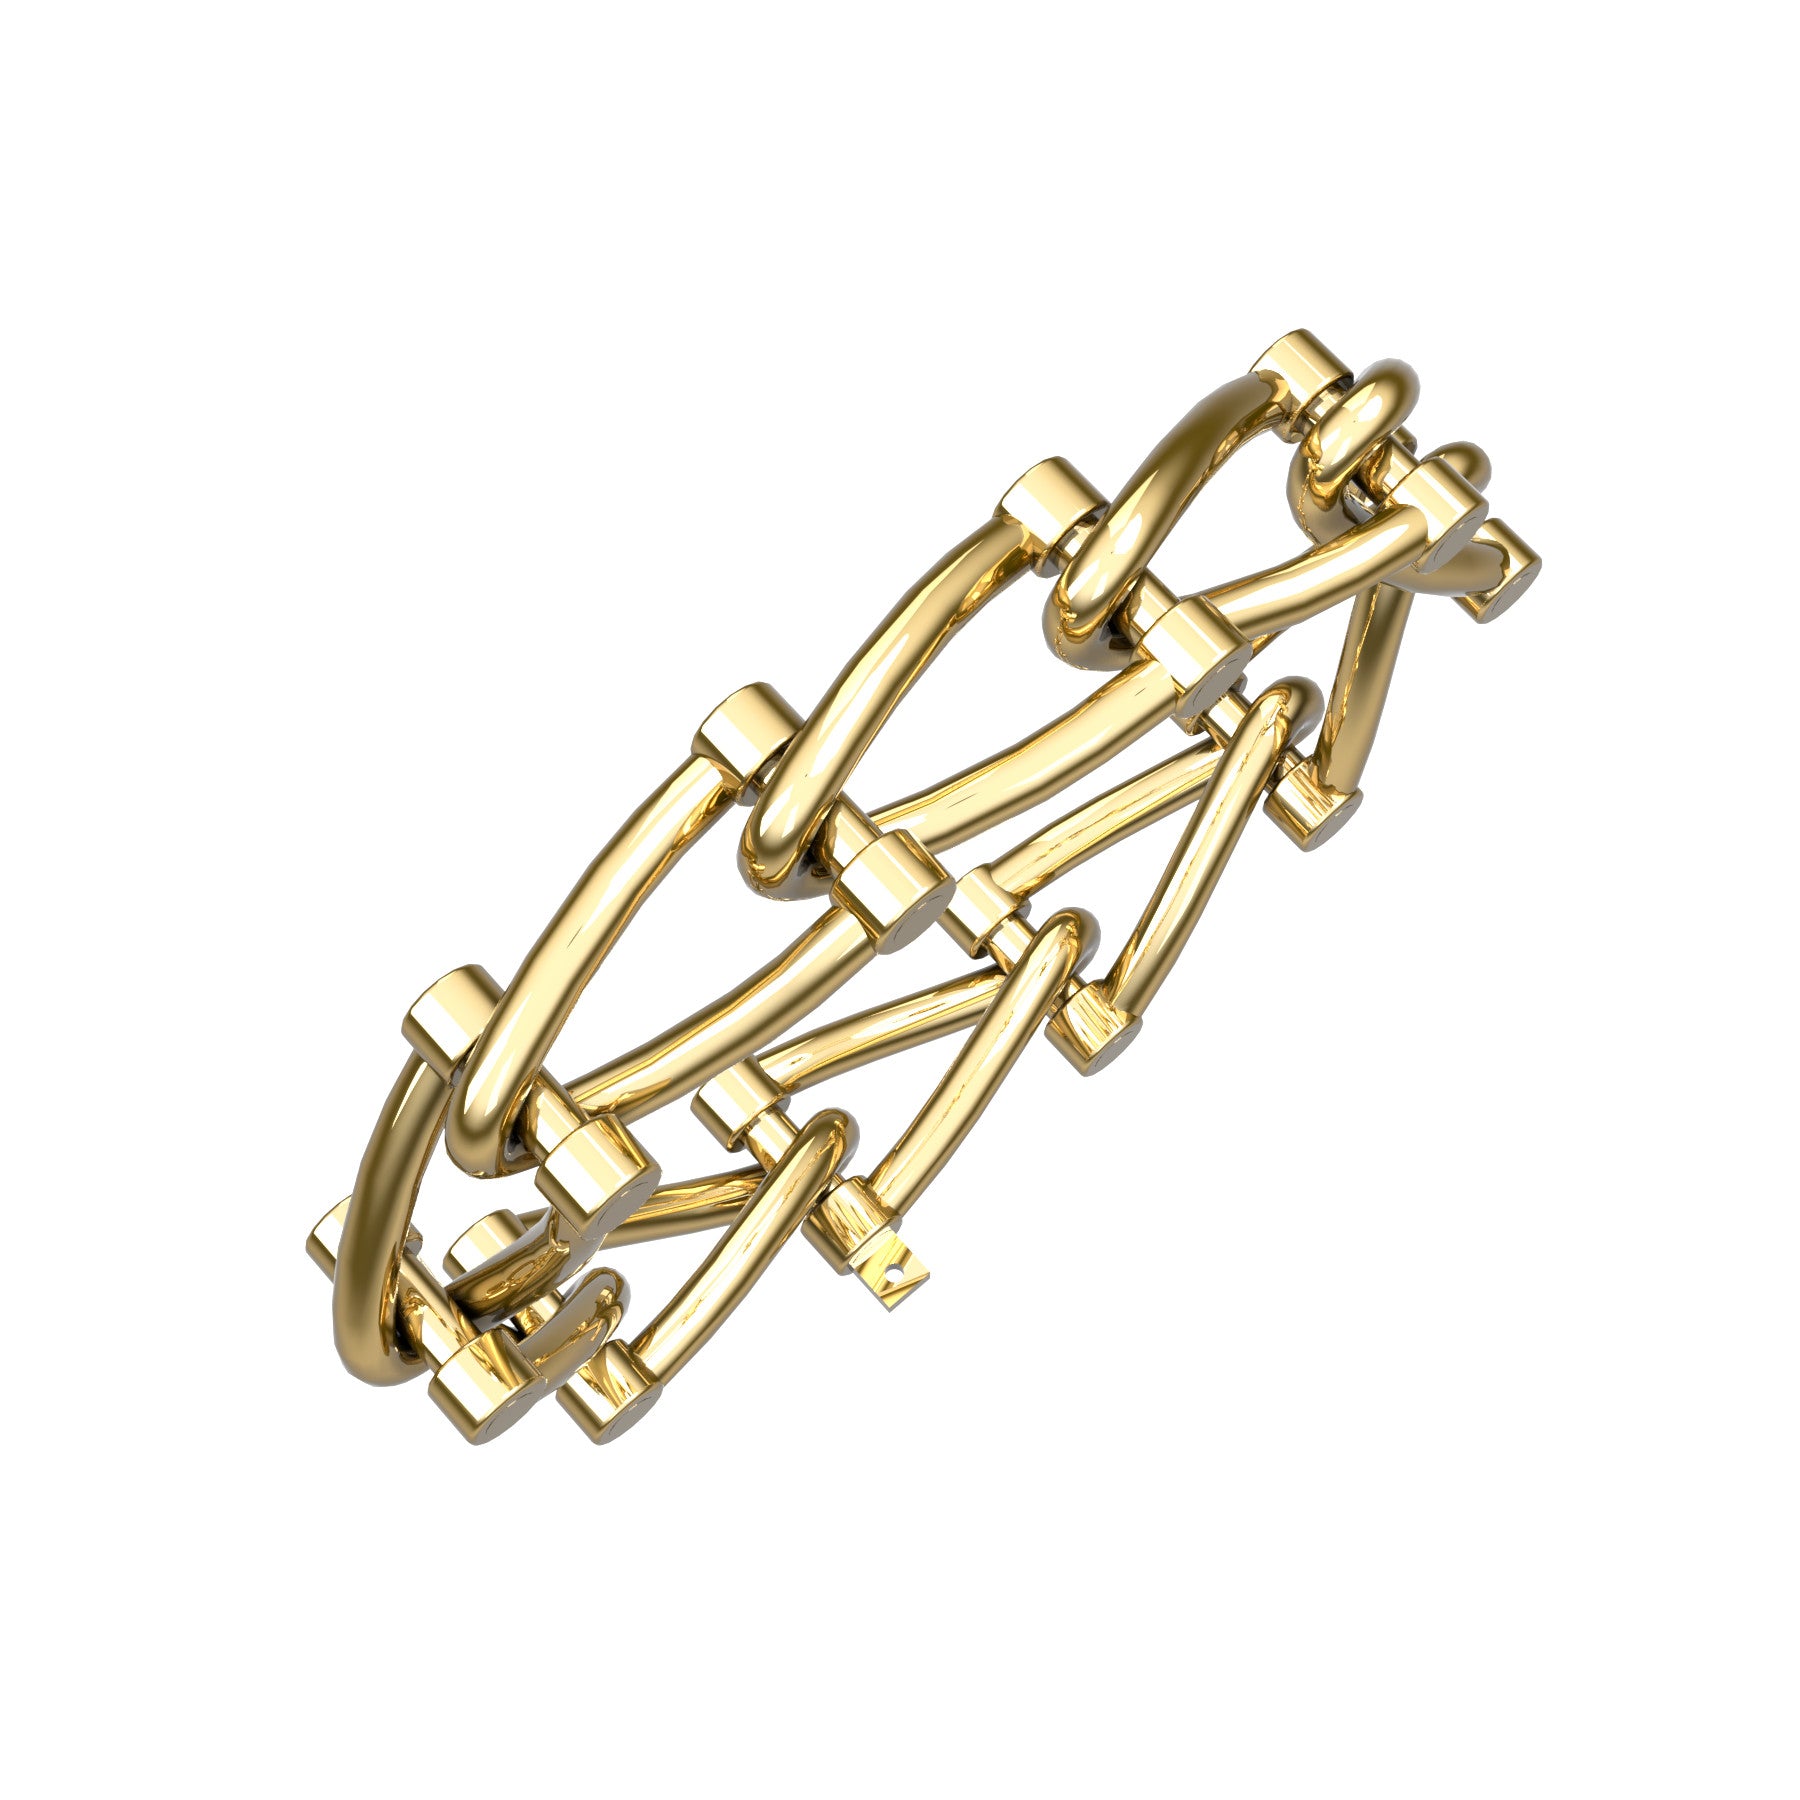 marine links bracelet, 18 K yellow gold, weight about 48,2 to 75,0 g (1.70 to 2.64 oz), width 12 mm max